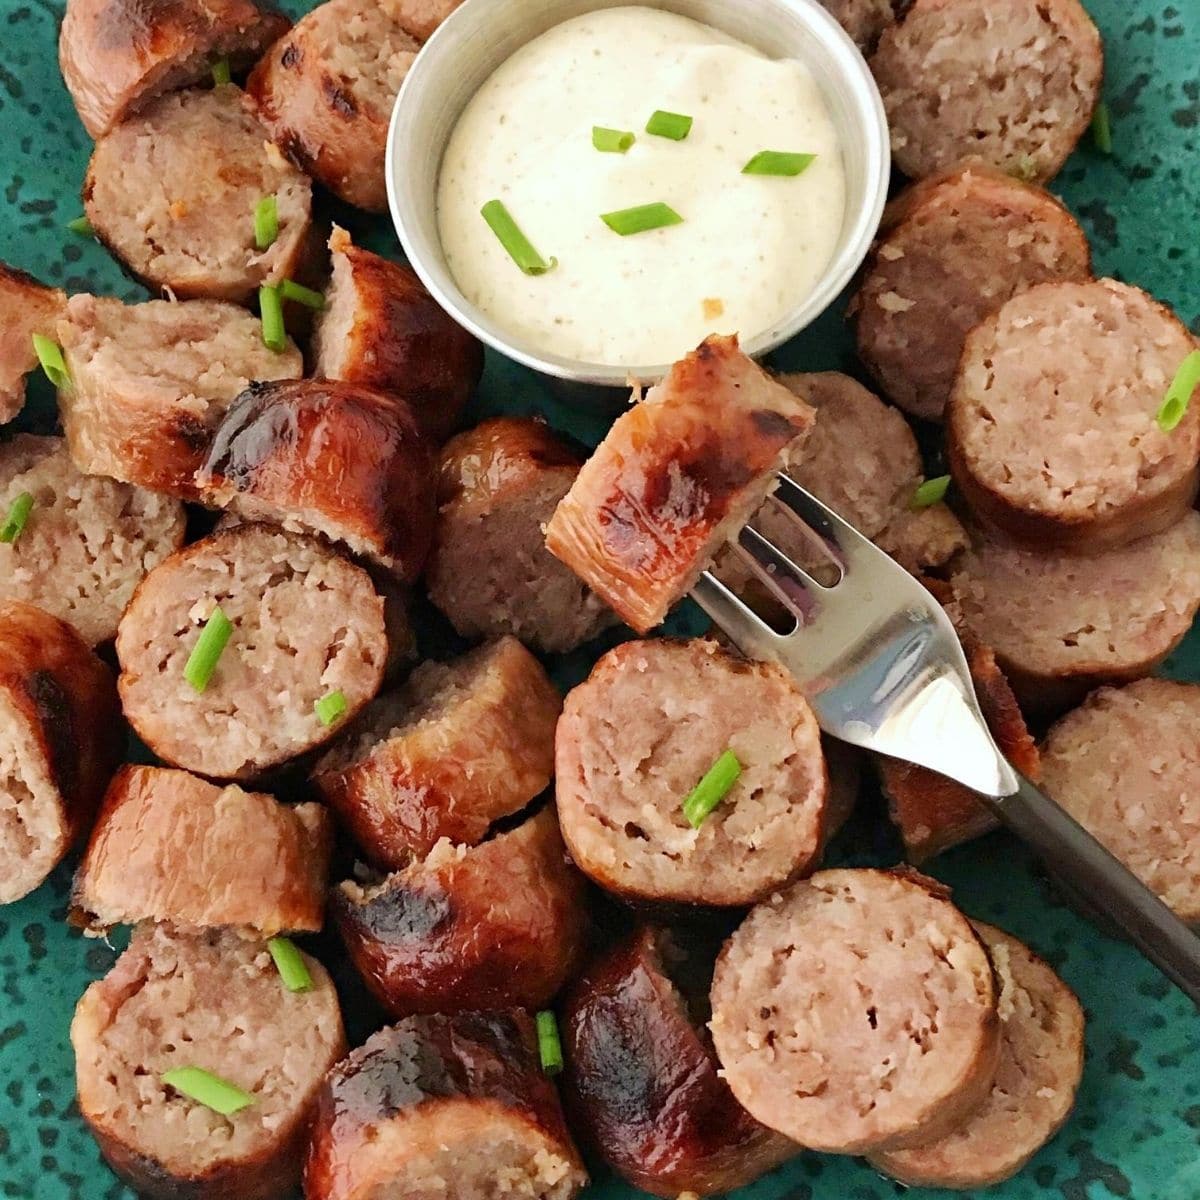 plate of sliced brats with sauce